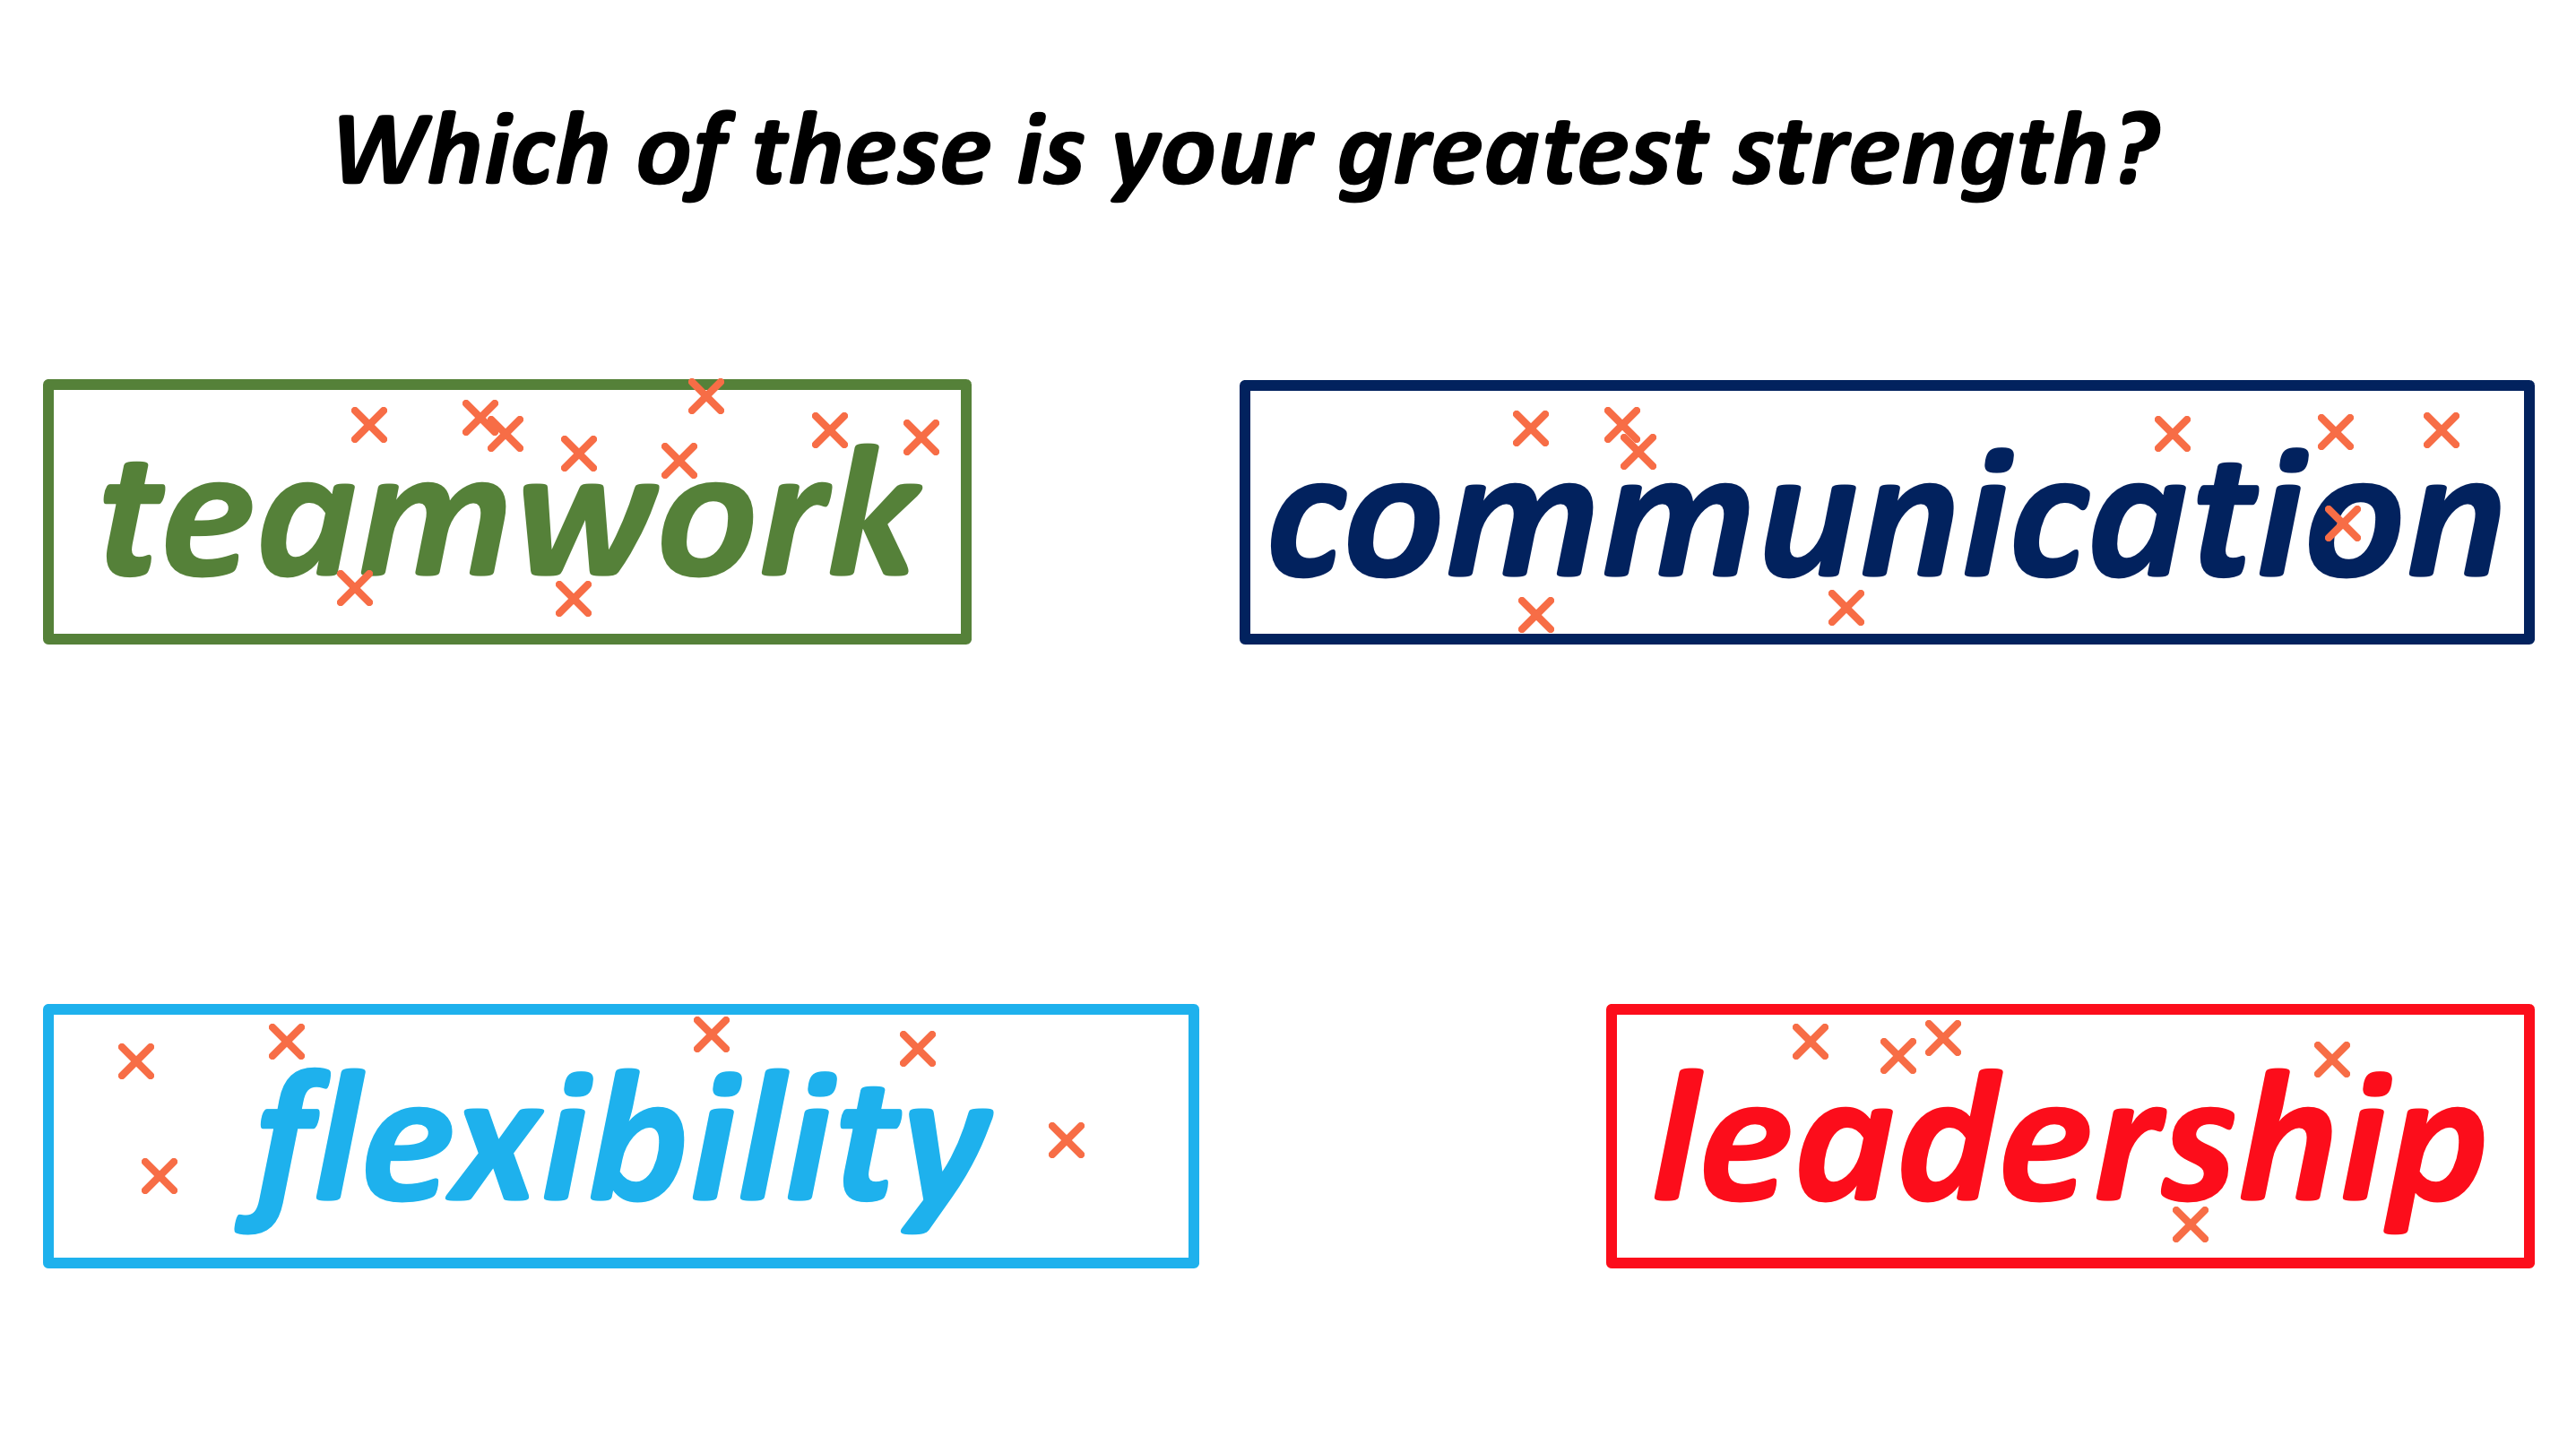 4 text boxes, each with one of the following words: teamwork, flexibility, communication, and leadership